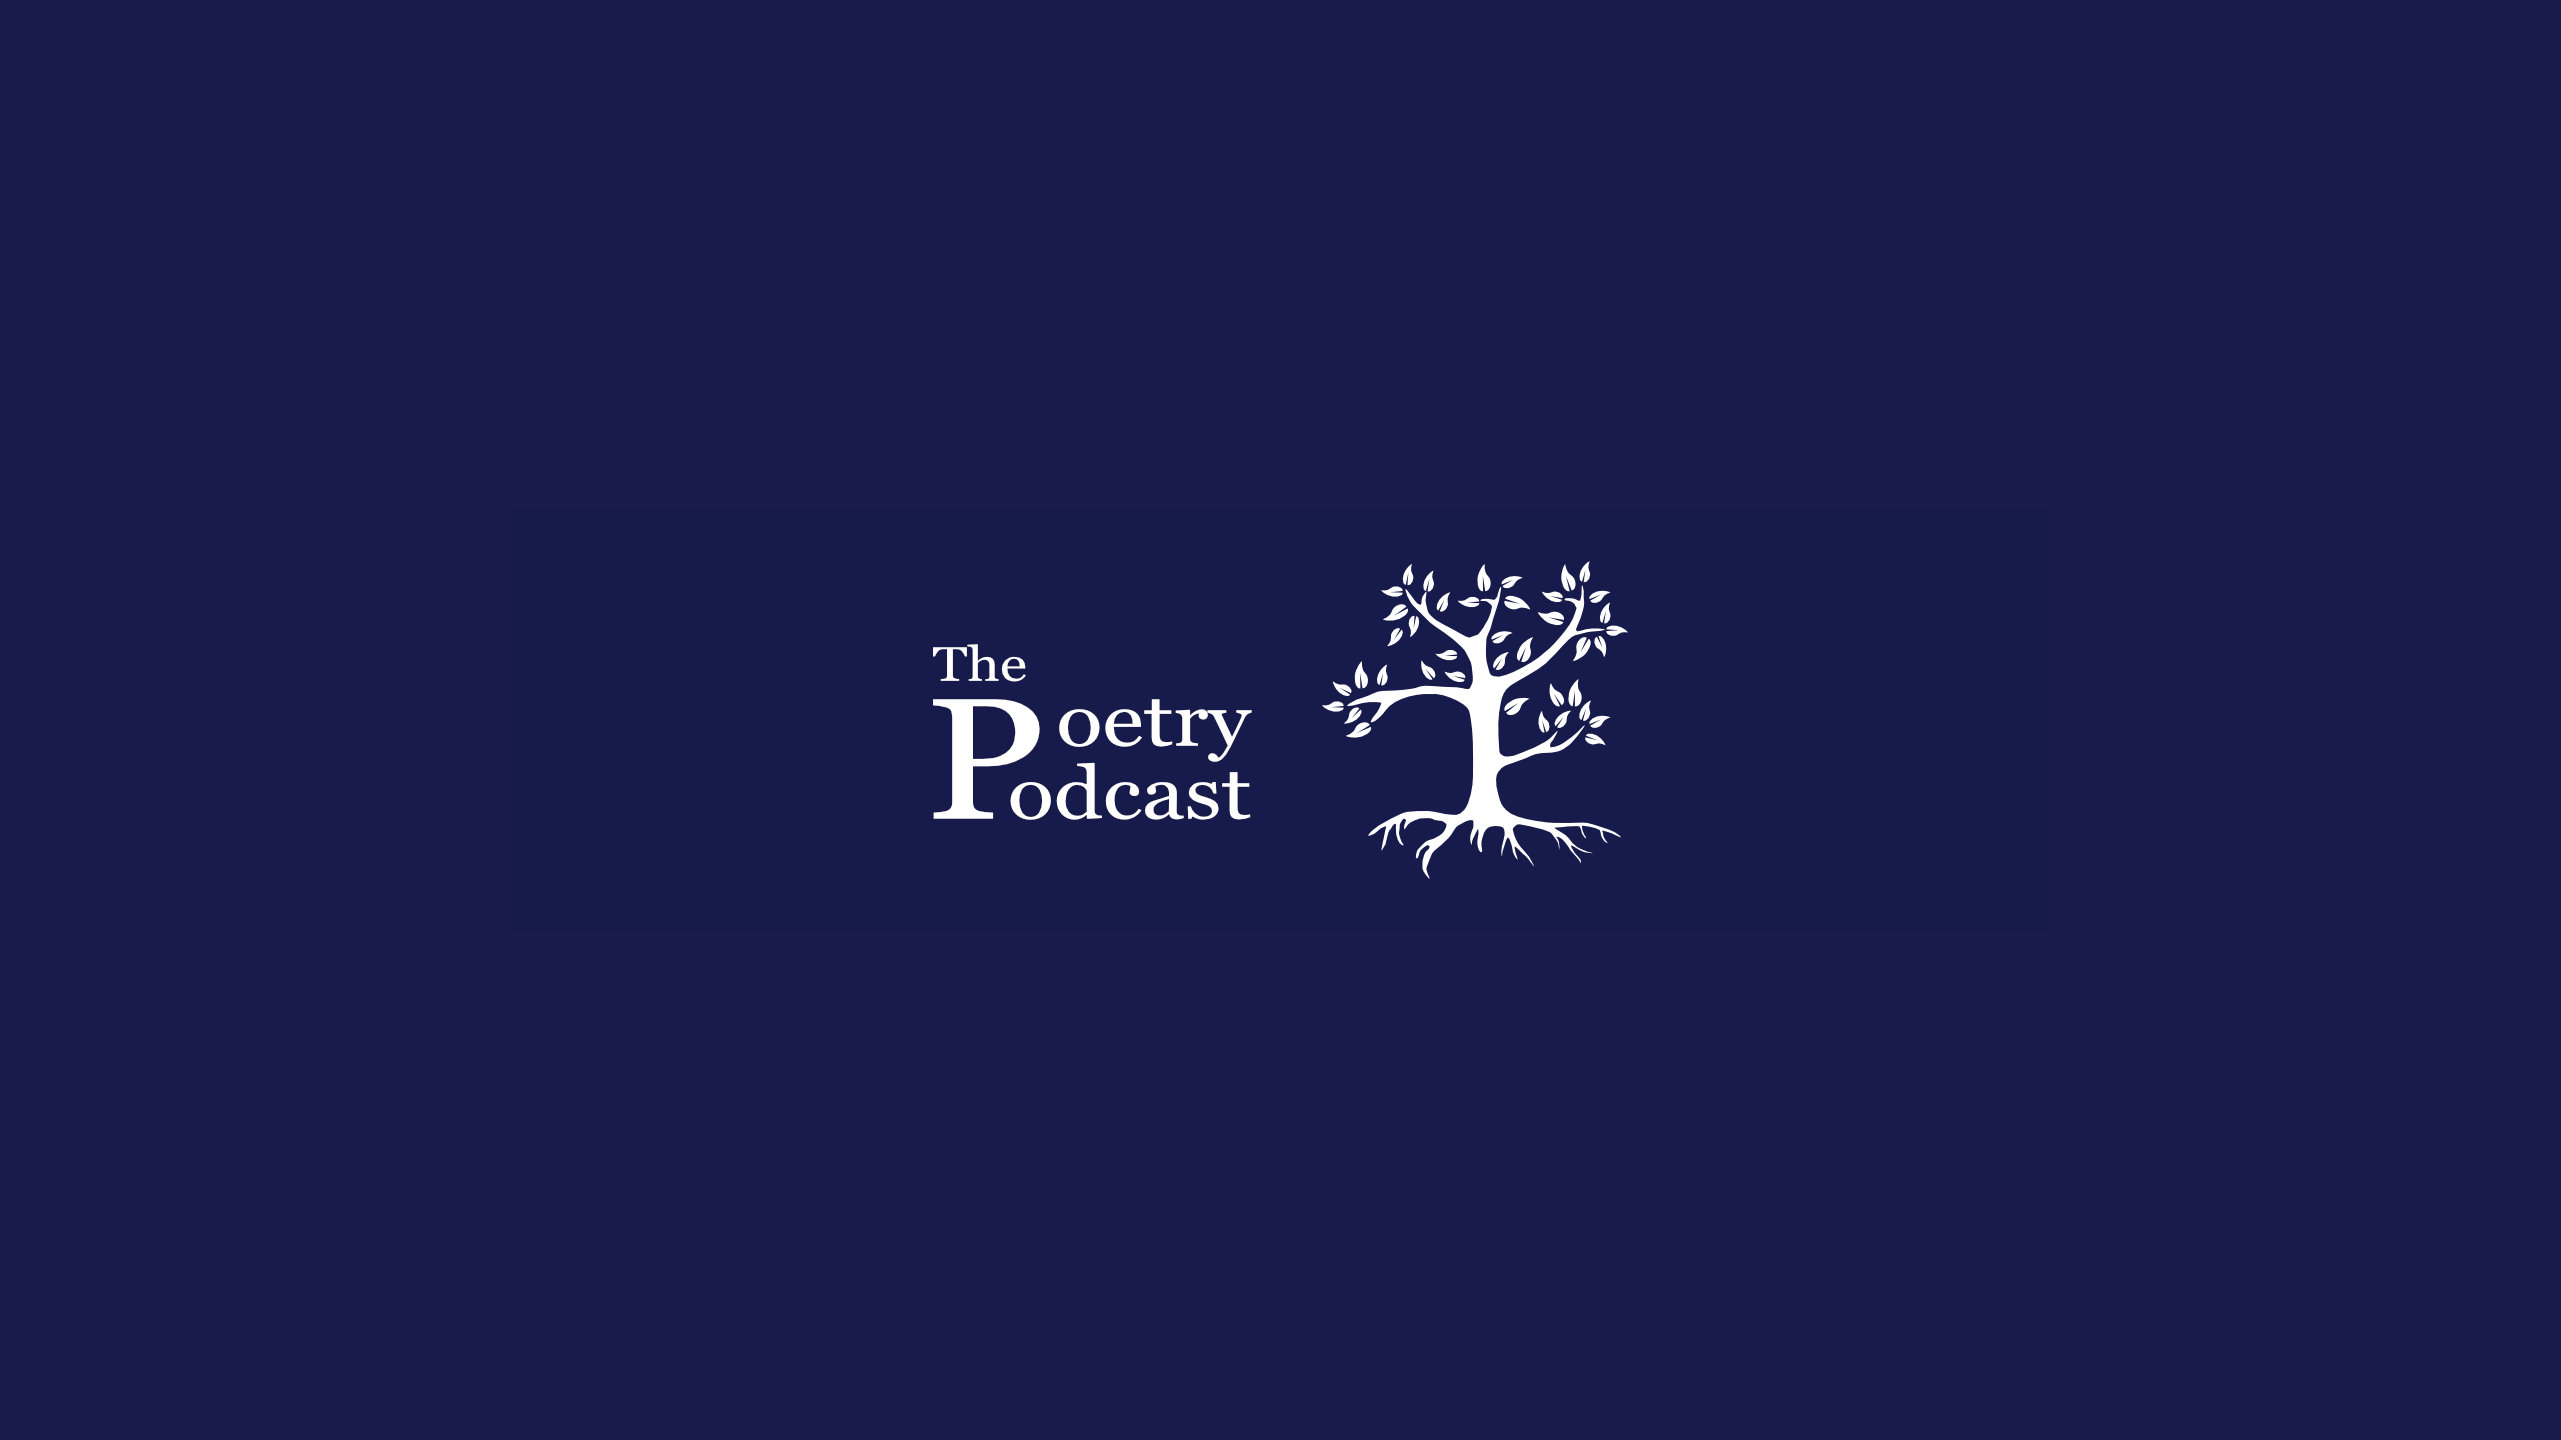 The Poetry Podcast